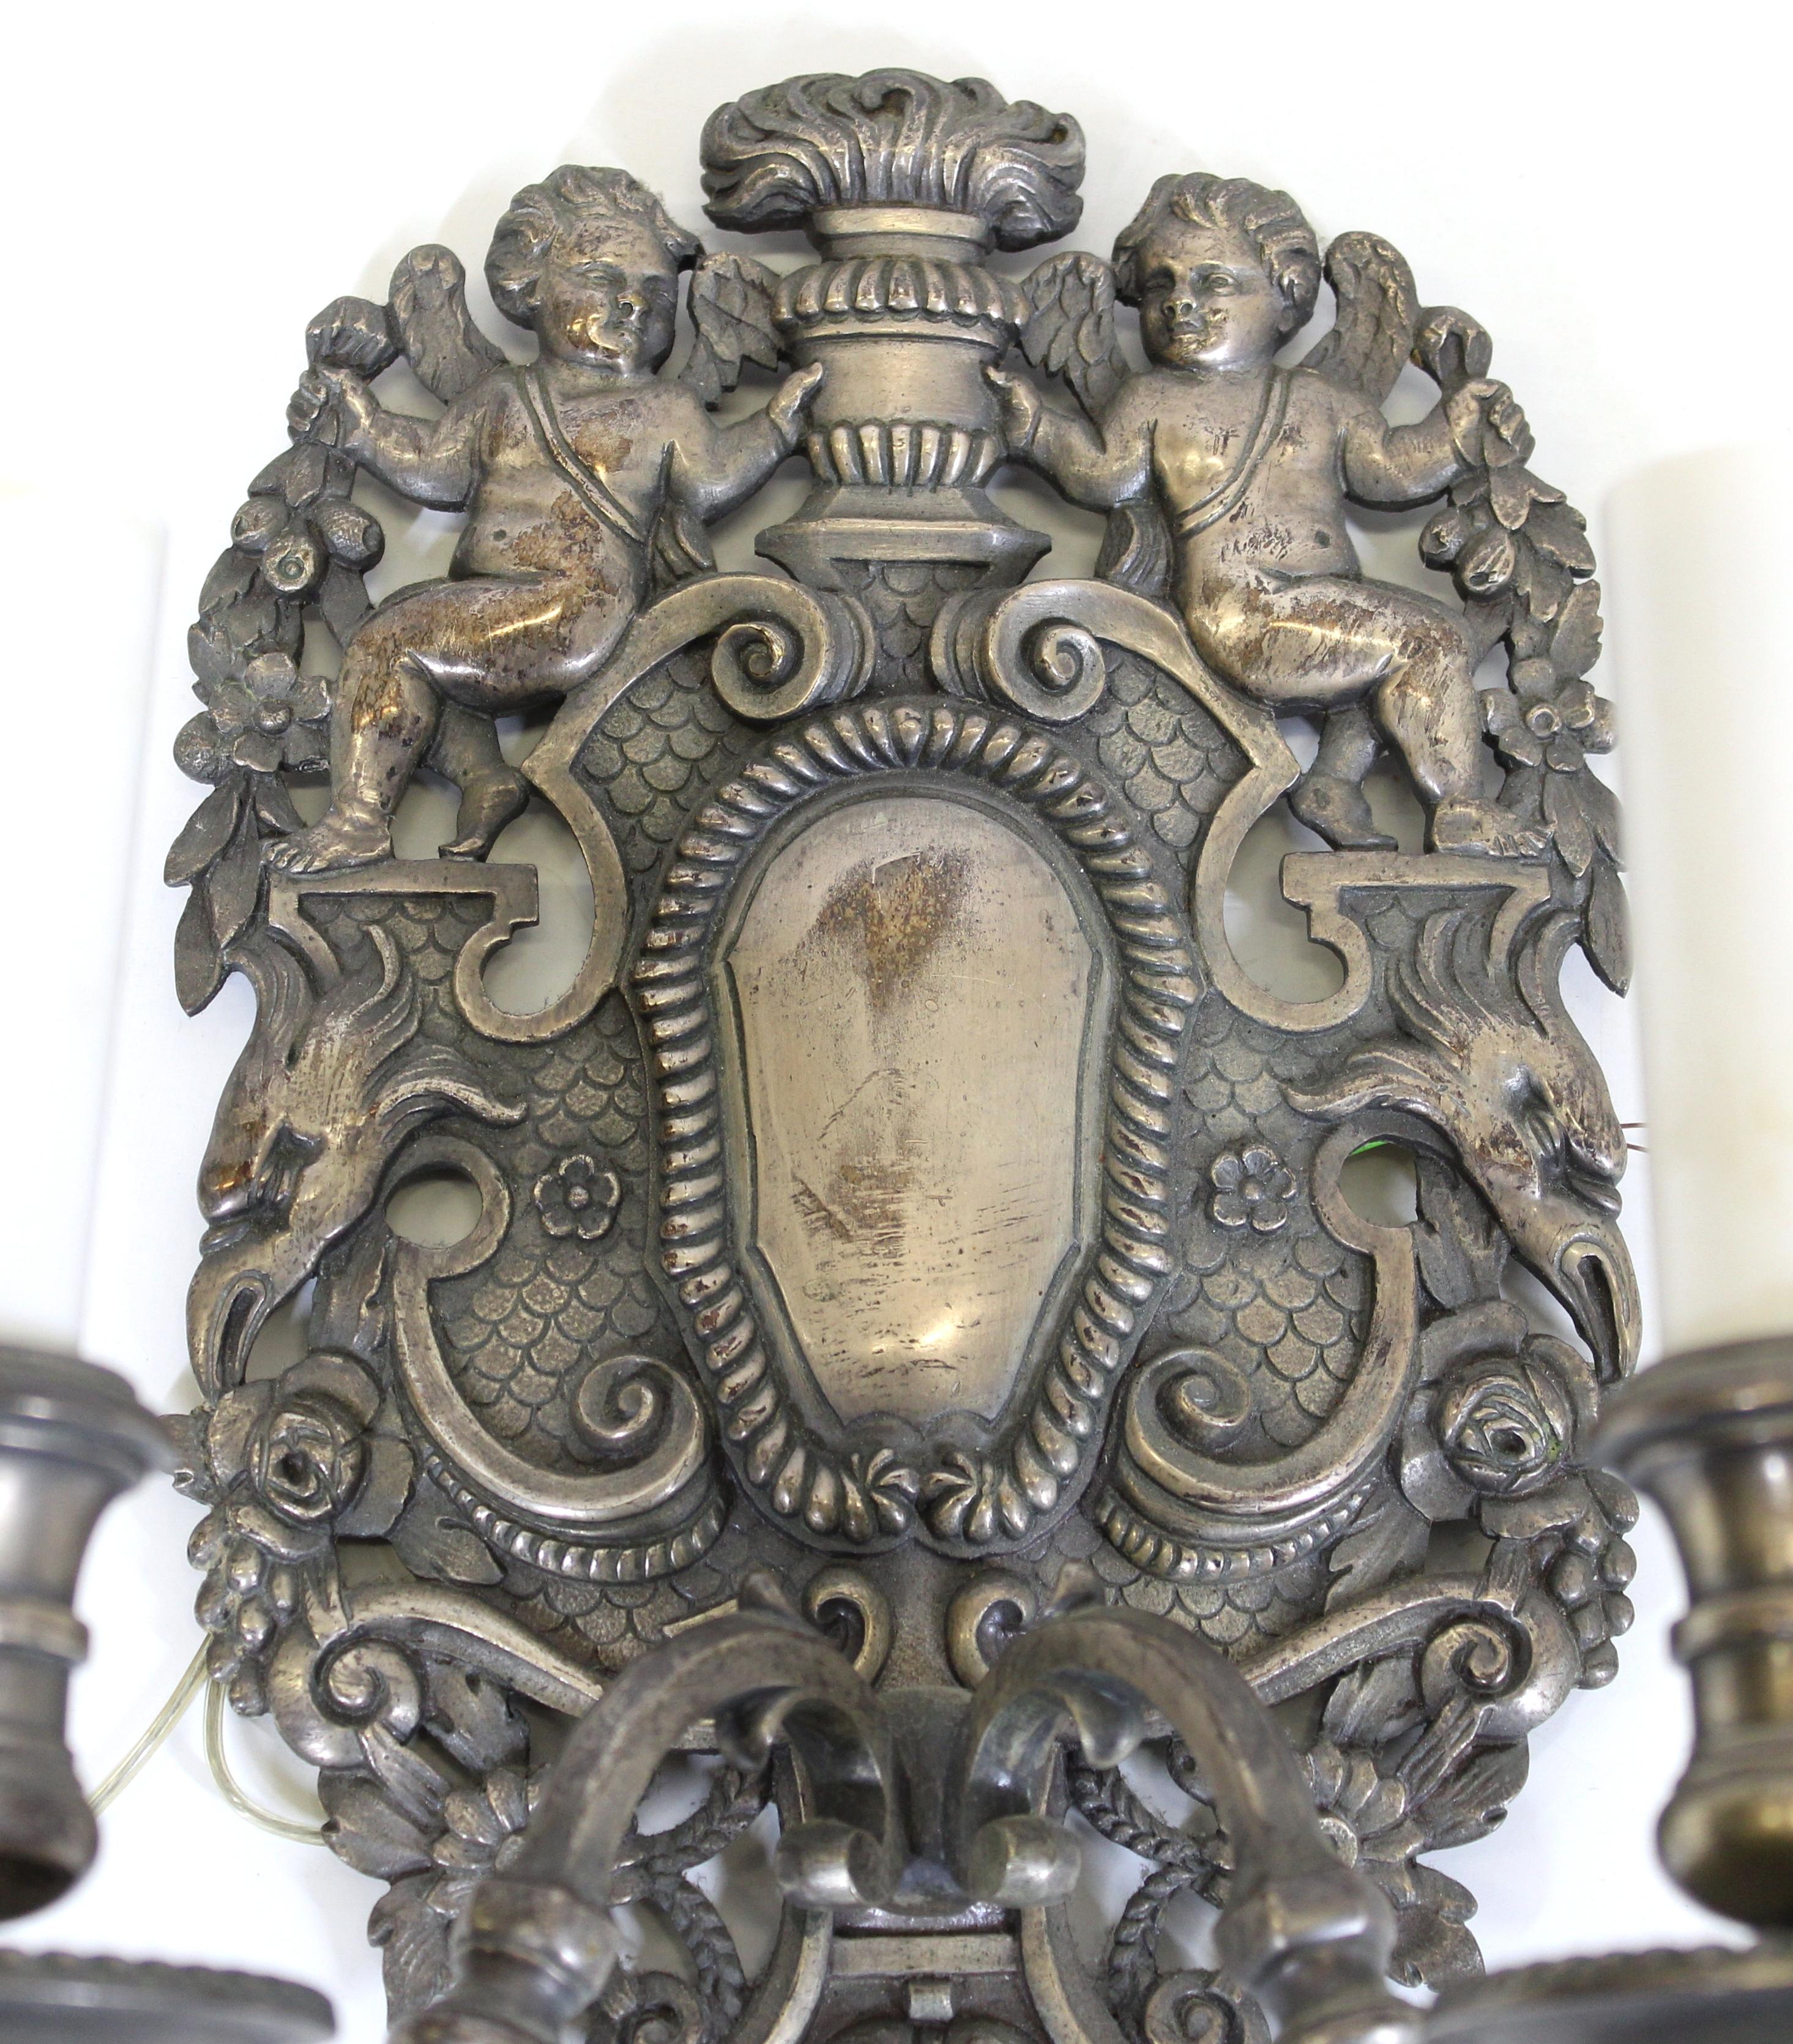 Caldwell American Renaissance Revival pair of wall sconces in silvered bronze, with ornamental cartouche back plate featuring putti. Made during the 1880's in the United States. In great antique condition with age-appropriate wear to the old silver